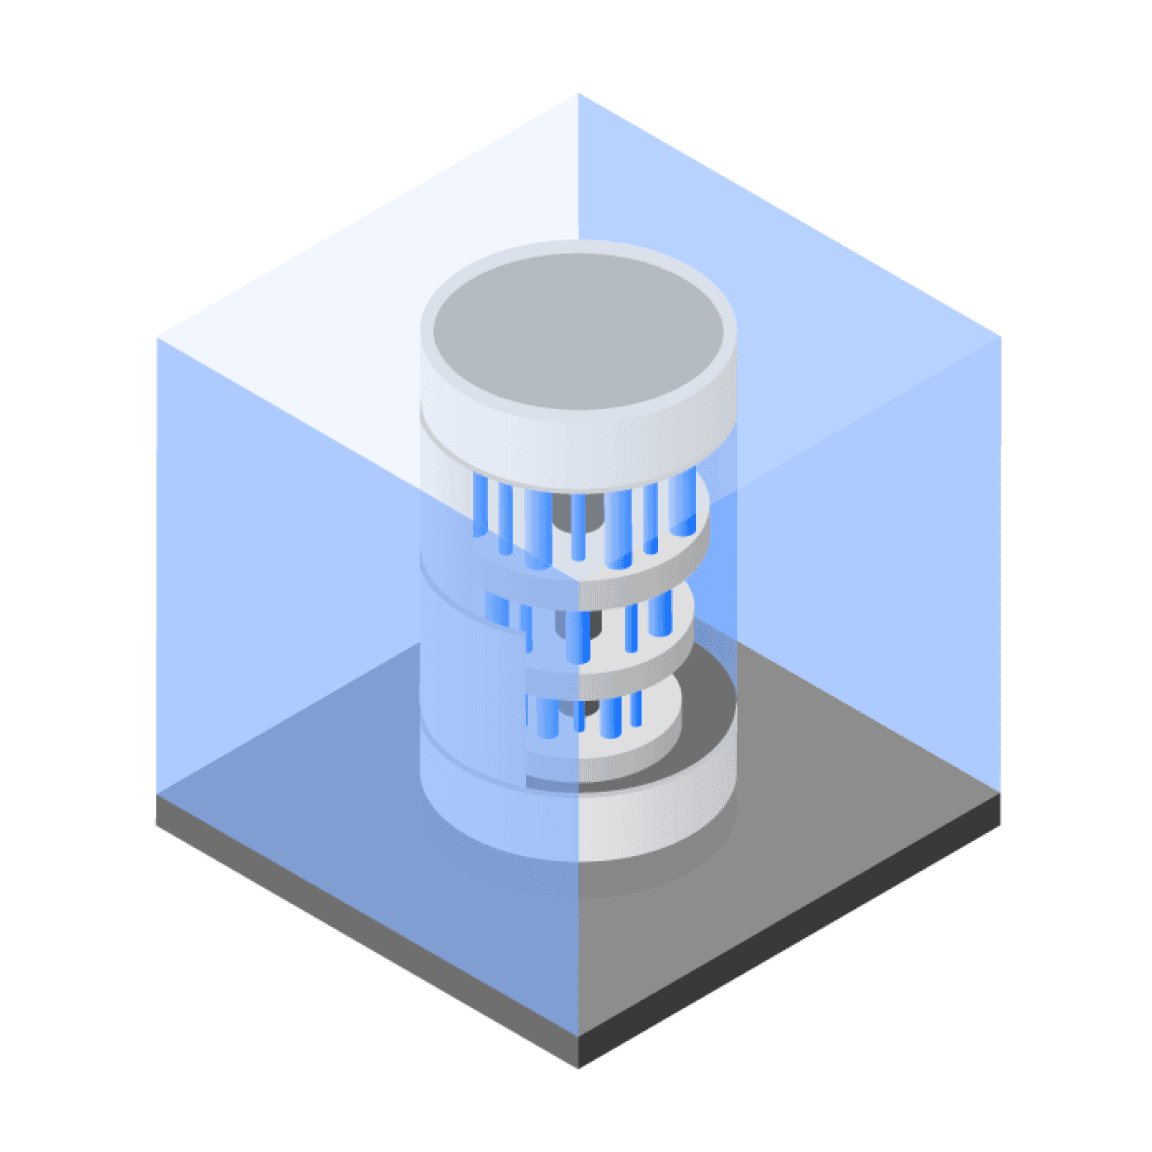 isometric illustration of a quantum computer in blue and gray